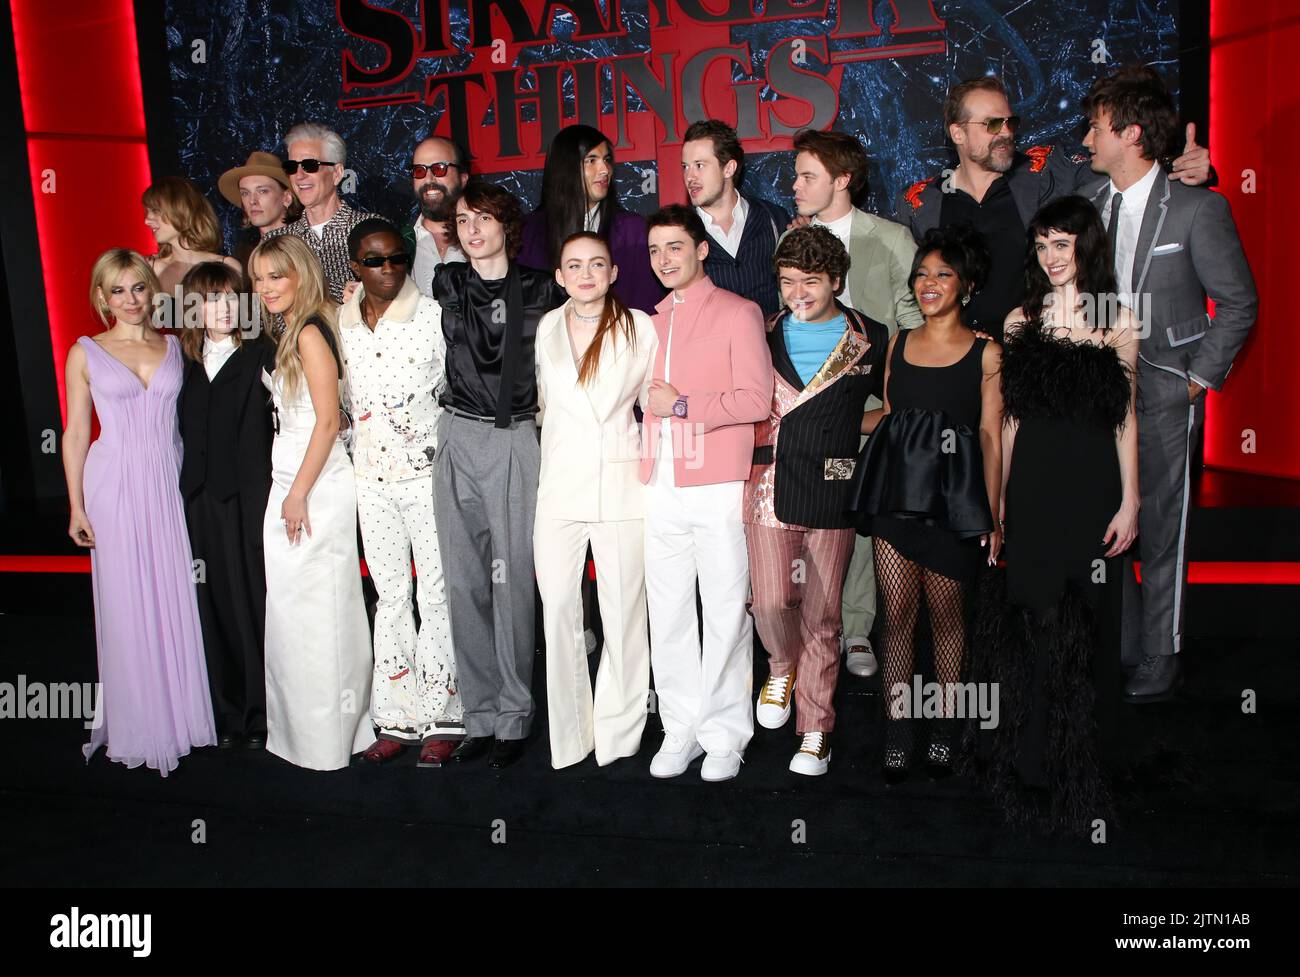 Photos: What the Stranger Things Cast Wore at the Season 4 Premiere